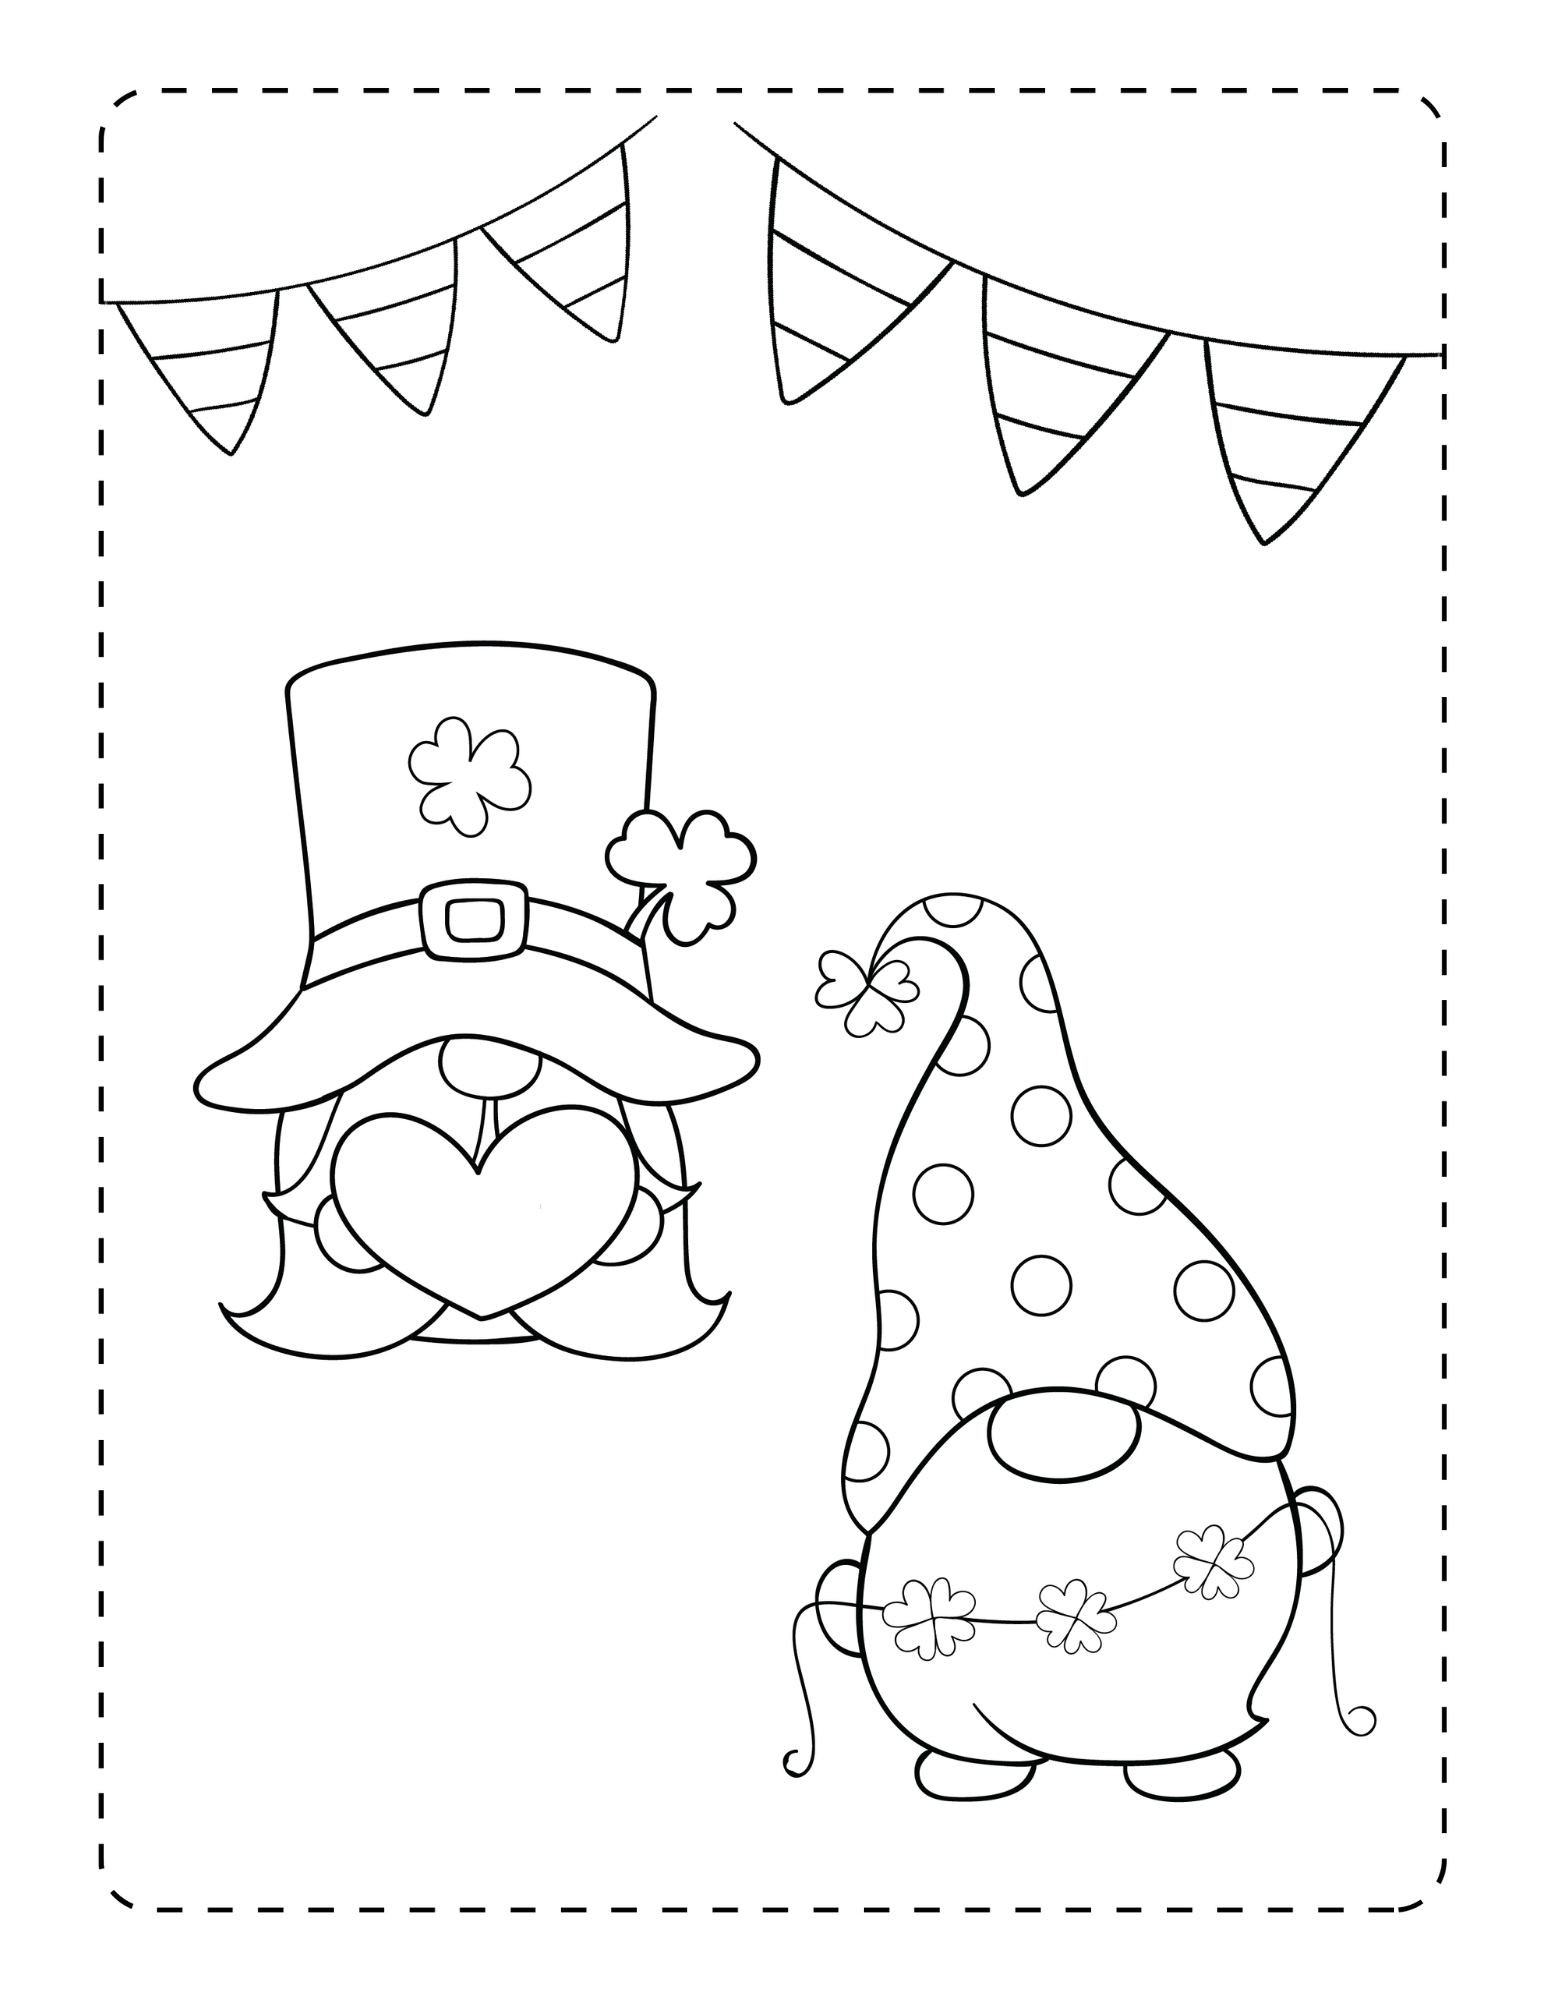 St patricks day gnome coloring pages